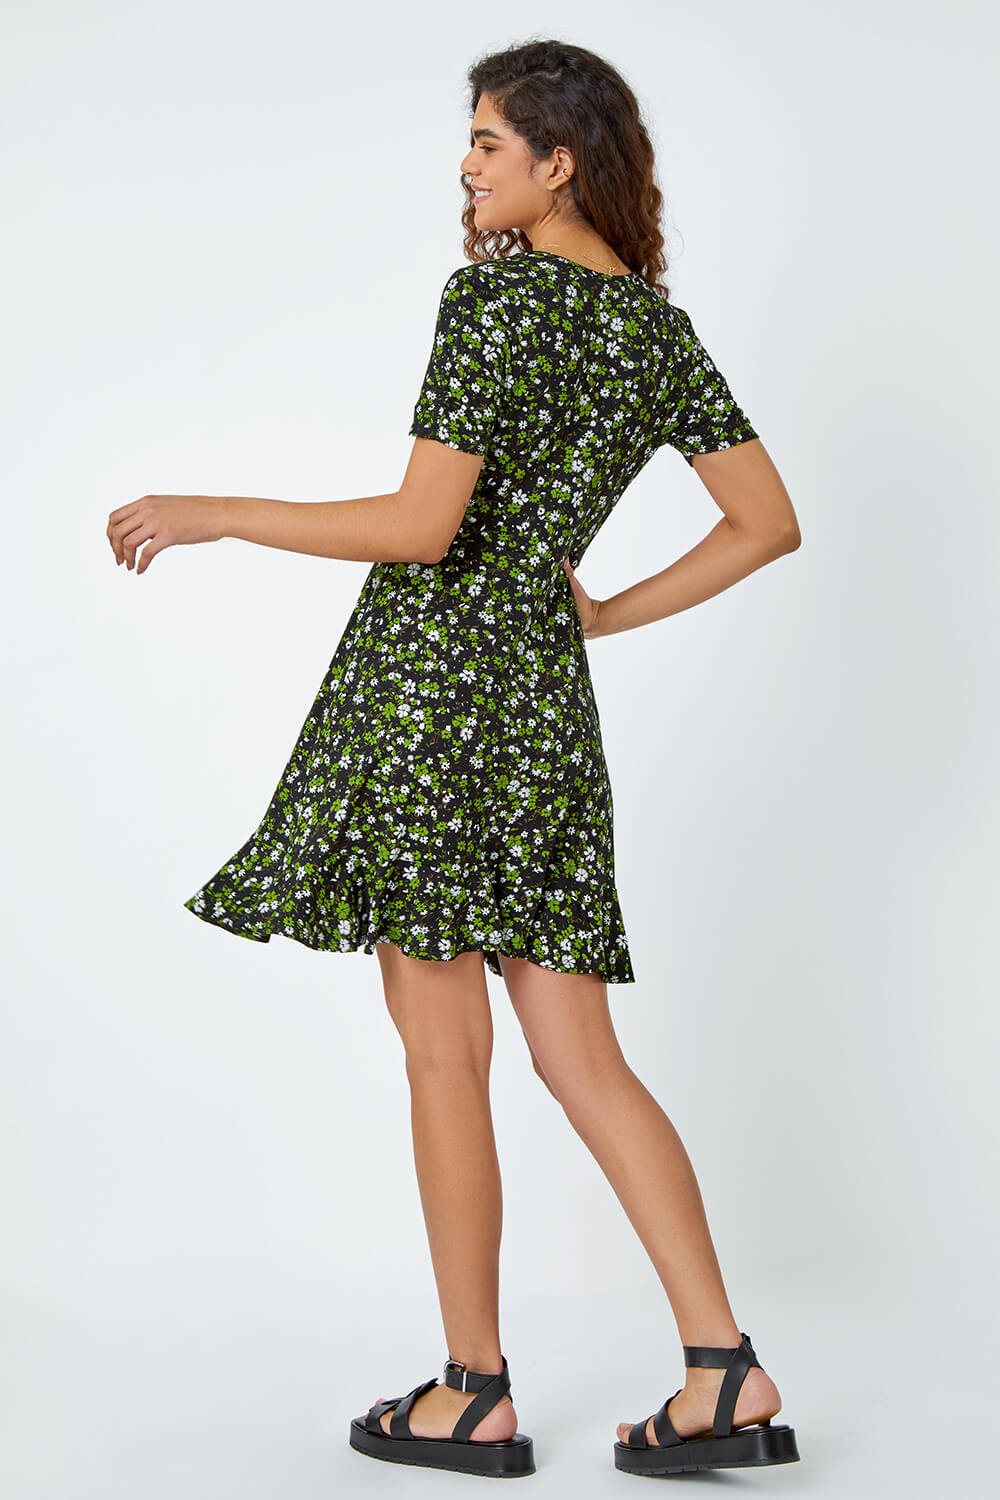 Green Floral Print Wrap Stretch Dress, Image 3 of 5